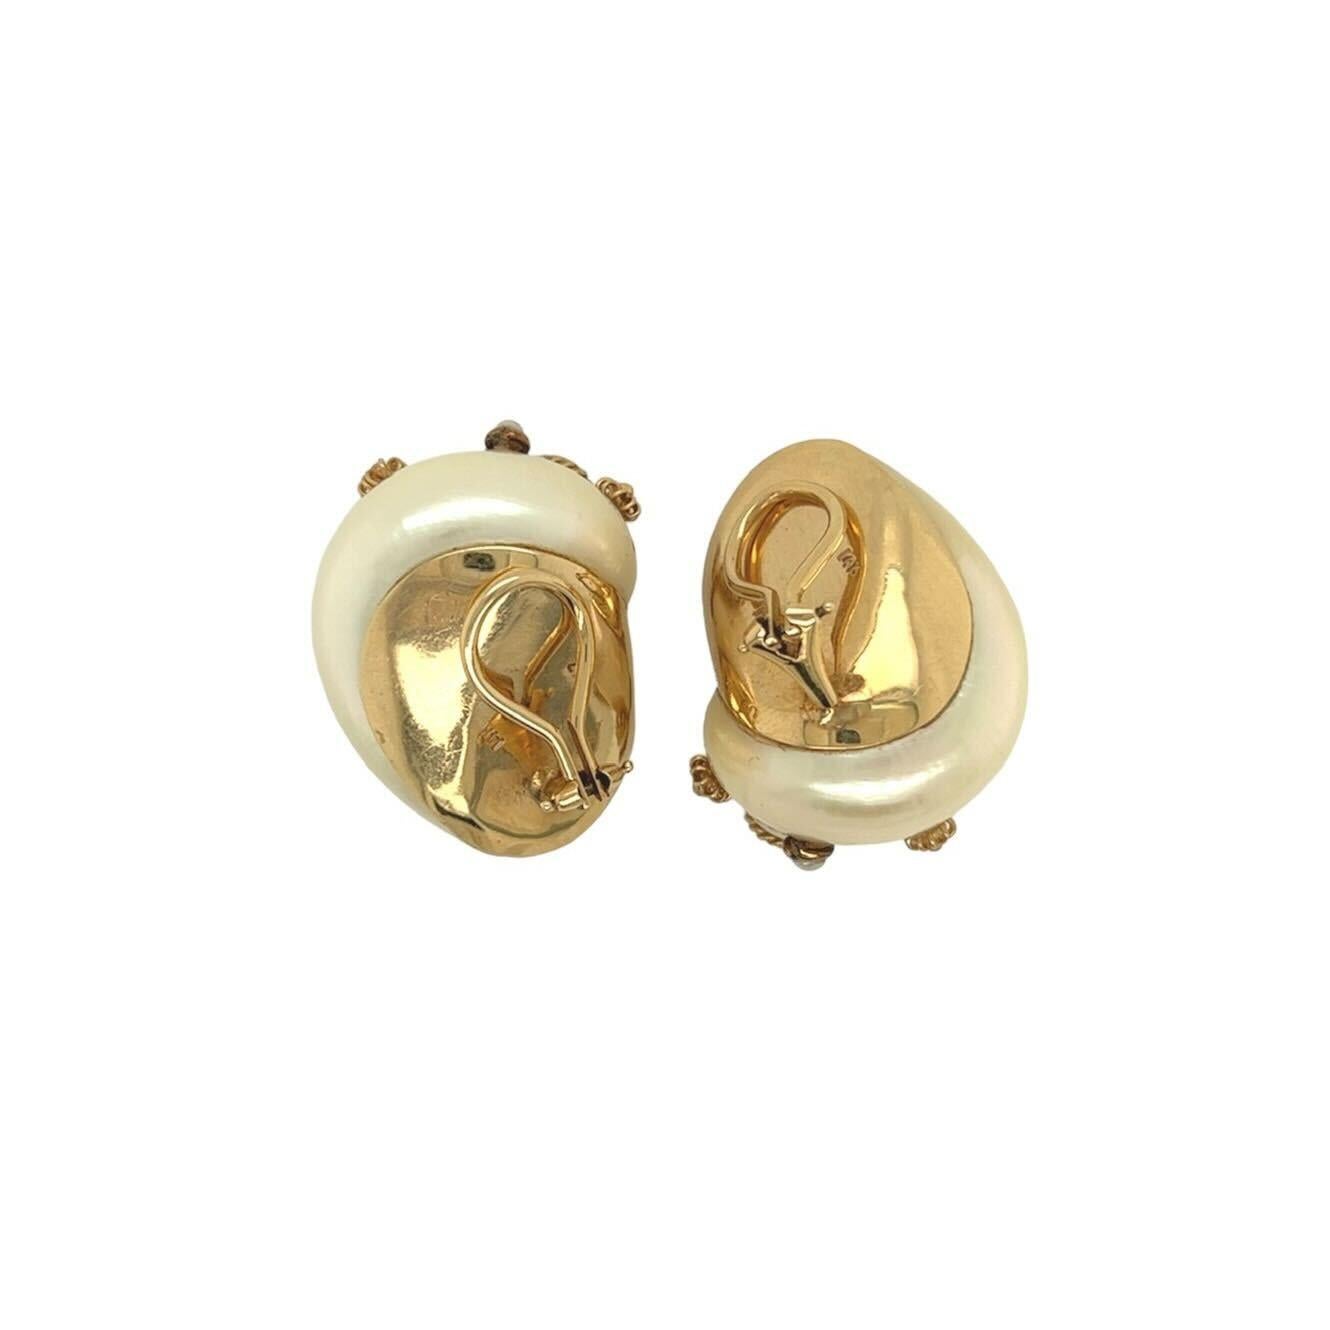 A pair of 14 karat yellow gold, shell and pearl earclips, Maz.  Each earclip designed as an iridescent white turbo shell applied around the spiral with ropework wire, three (3) bezel set seed pearls, three (3) gold rosettes, a bezel set half pearl